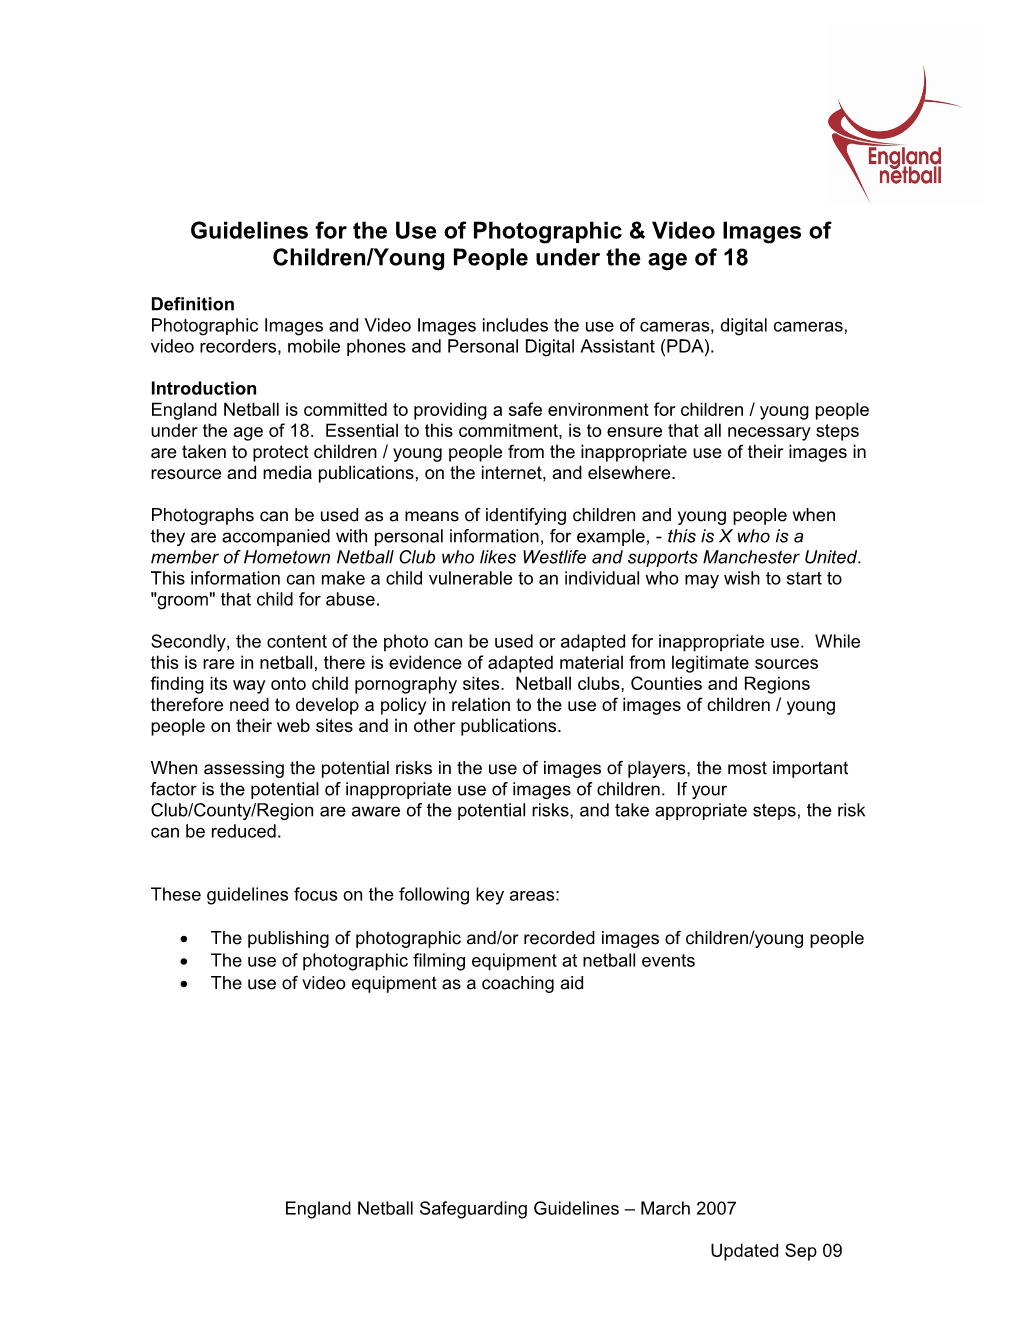 Guidelines for the Use of Photographic & Video Images of Children/Young People Under The